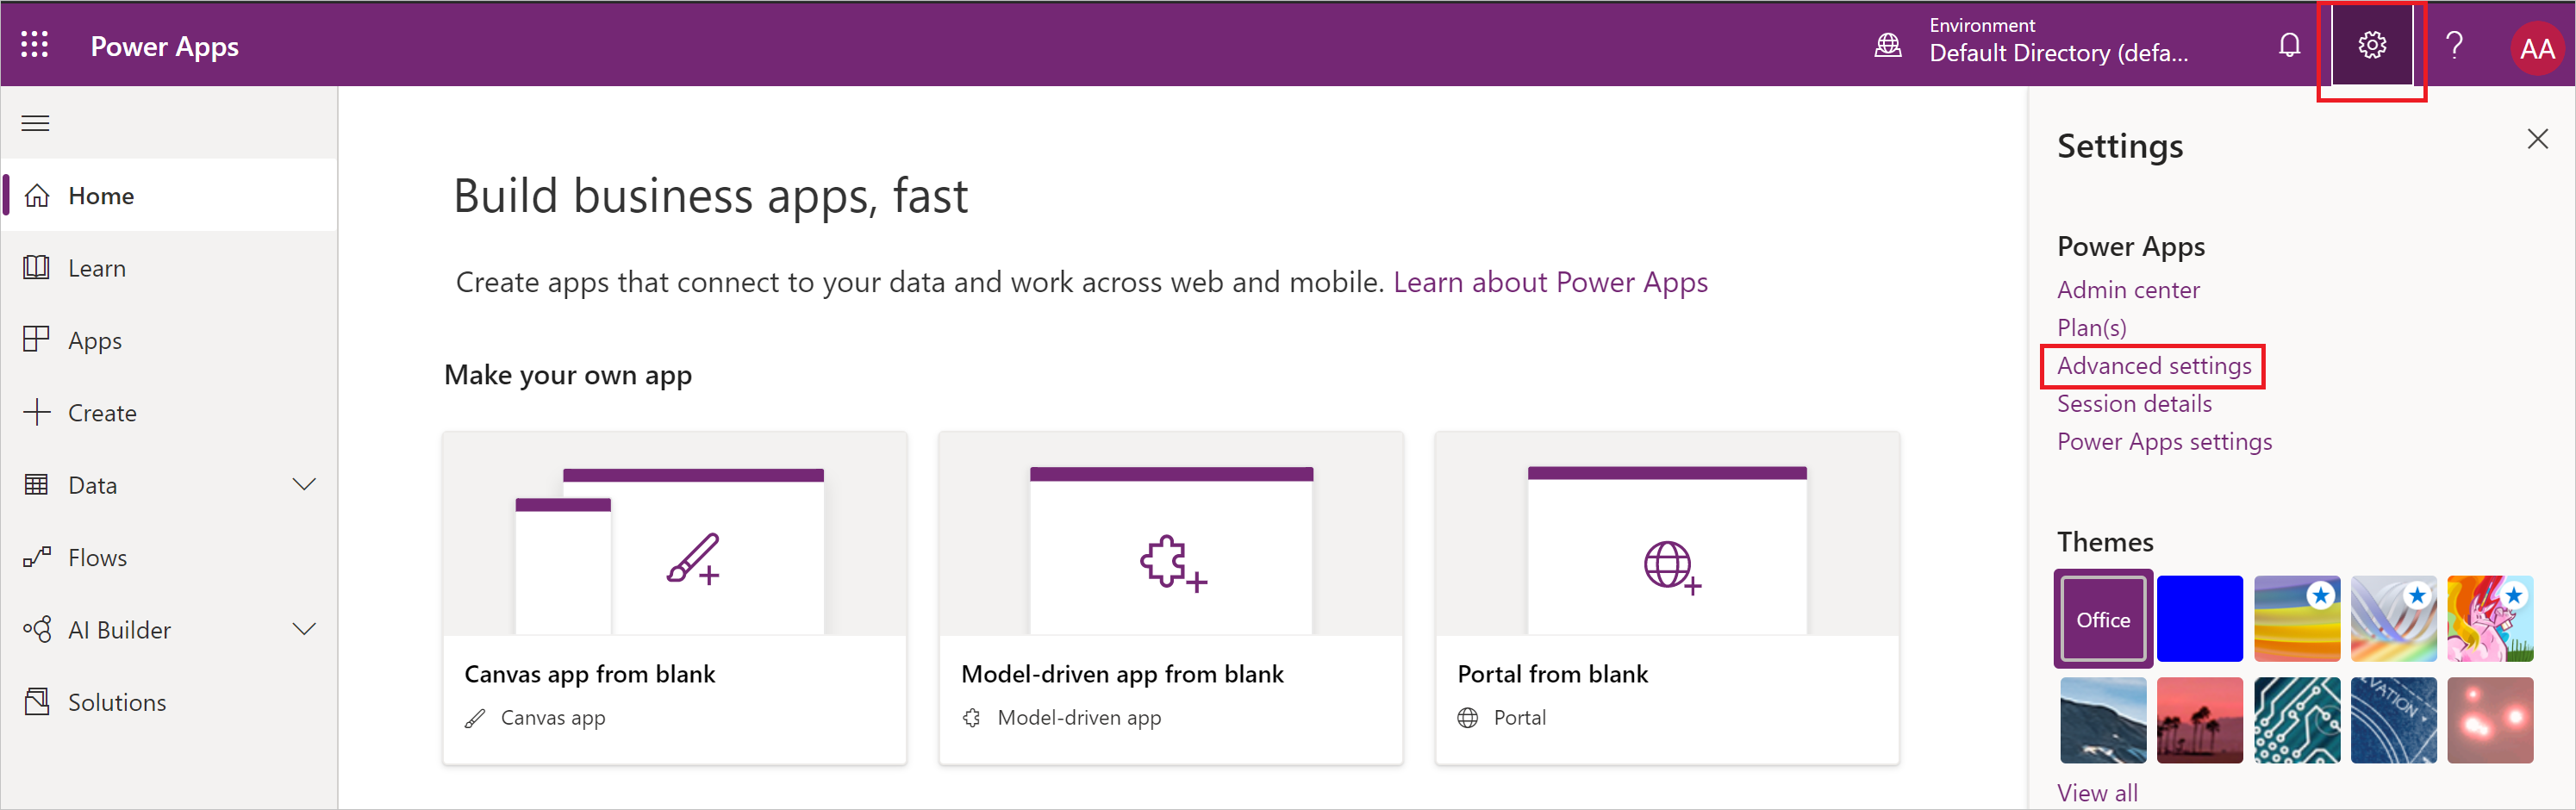 Screenshot of the Power Apps Settings menu with Advanced settings highlighted.